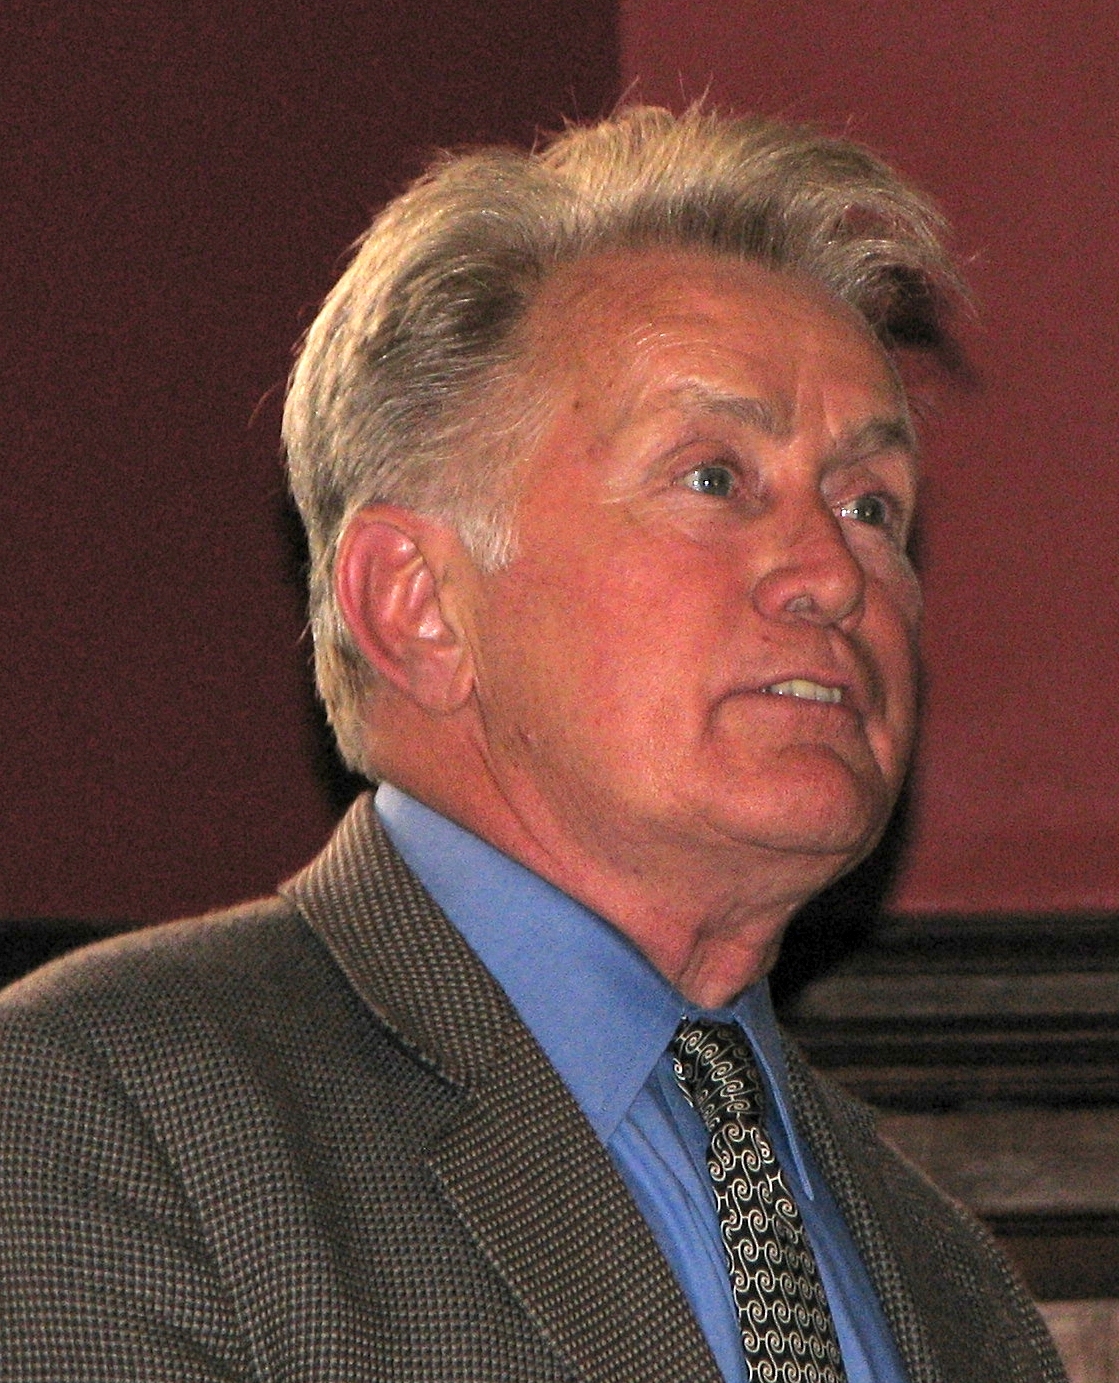 Martin_Sheen_at_the_Oxford_Union_3